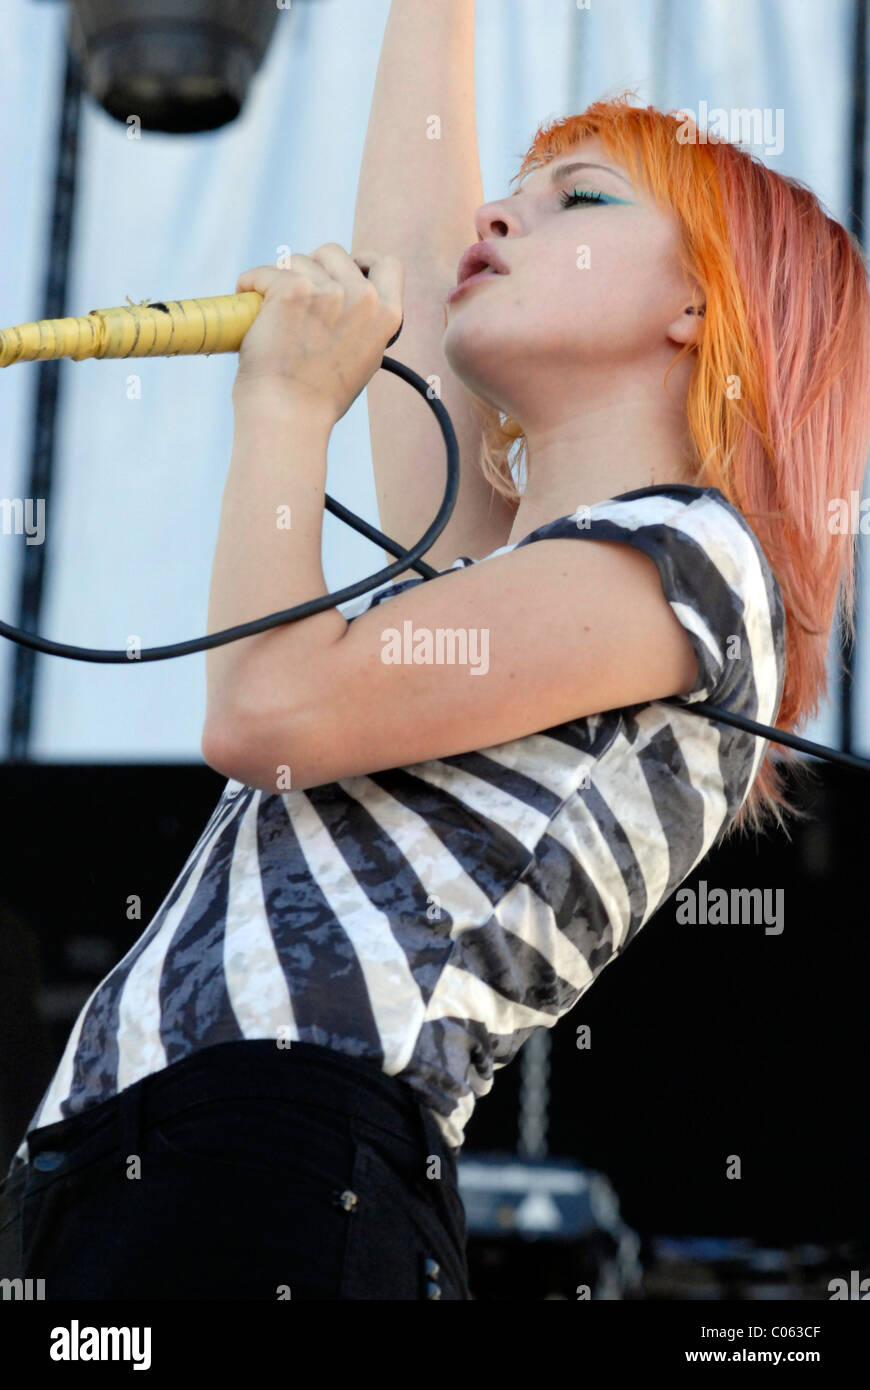 Hayley Williams From The Band Paramore Performing Live At The Kroq La Invasion At The Home Depot Centre Los Angeles Stock Photo Alamy